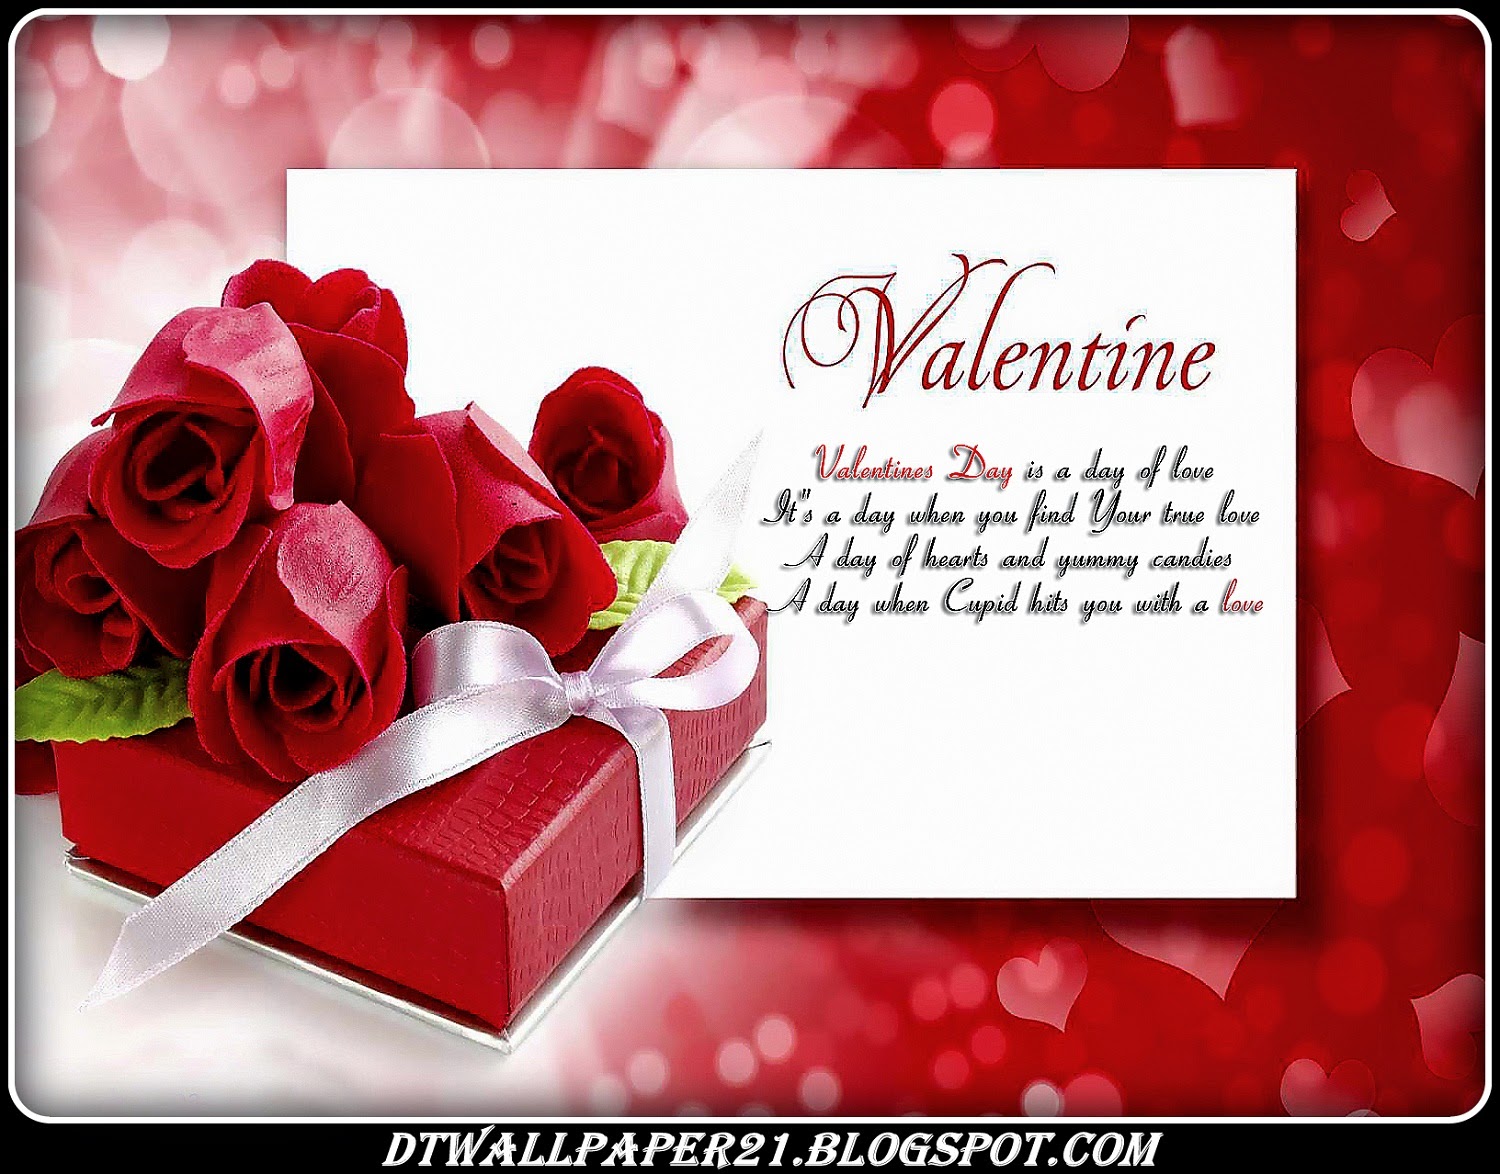 Desktop Wallpaper || Background Screensavers: Unique Valentines Day Quotes Gift Cards ...1500 x 1174